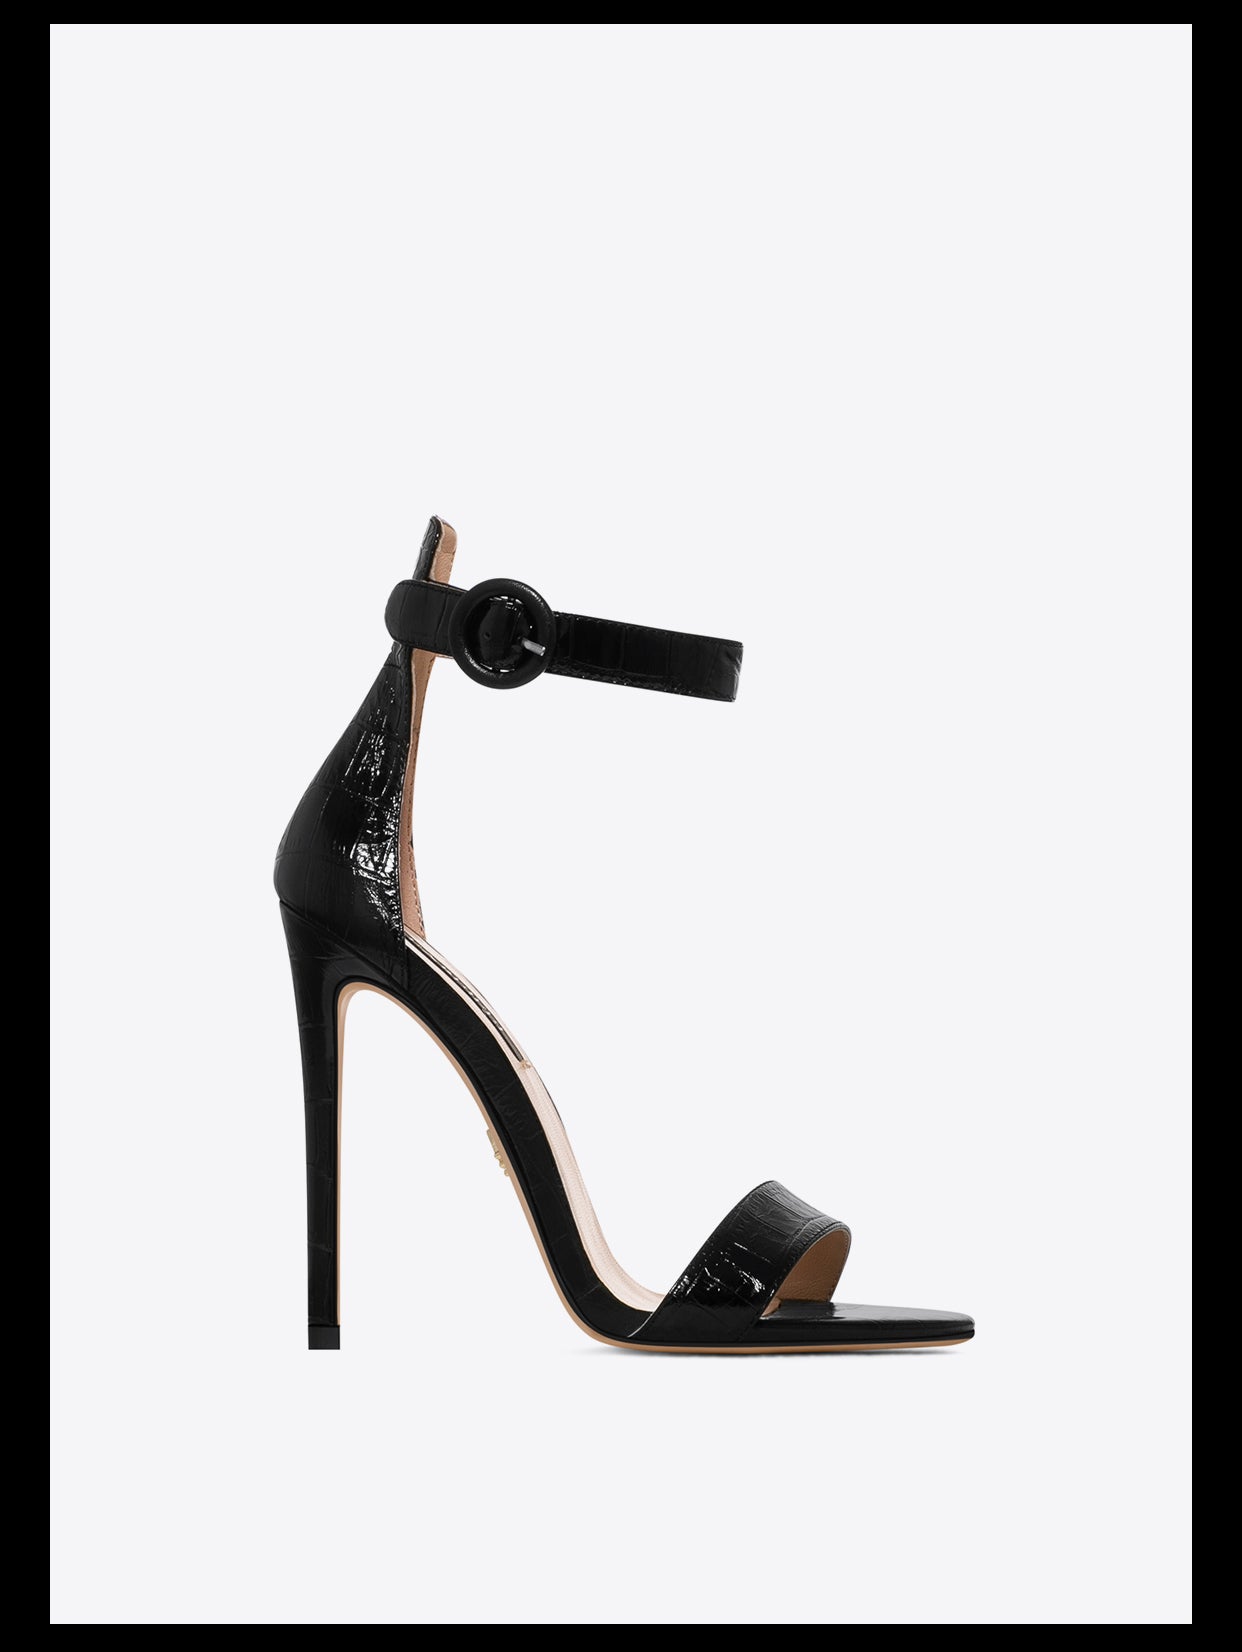 Open-toed high-heeled sexy black stiletto sandals - Nihie